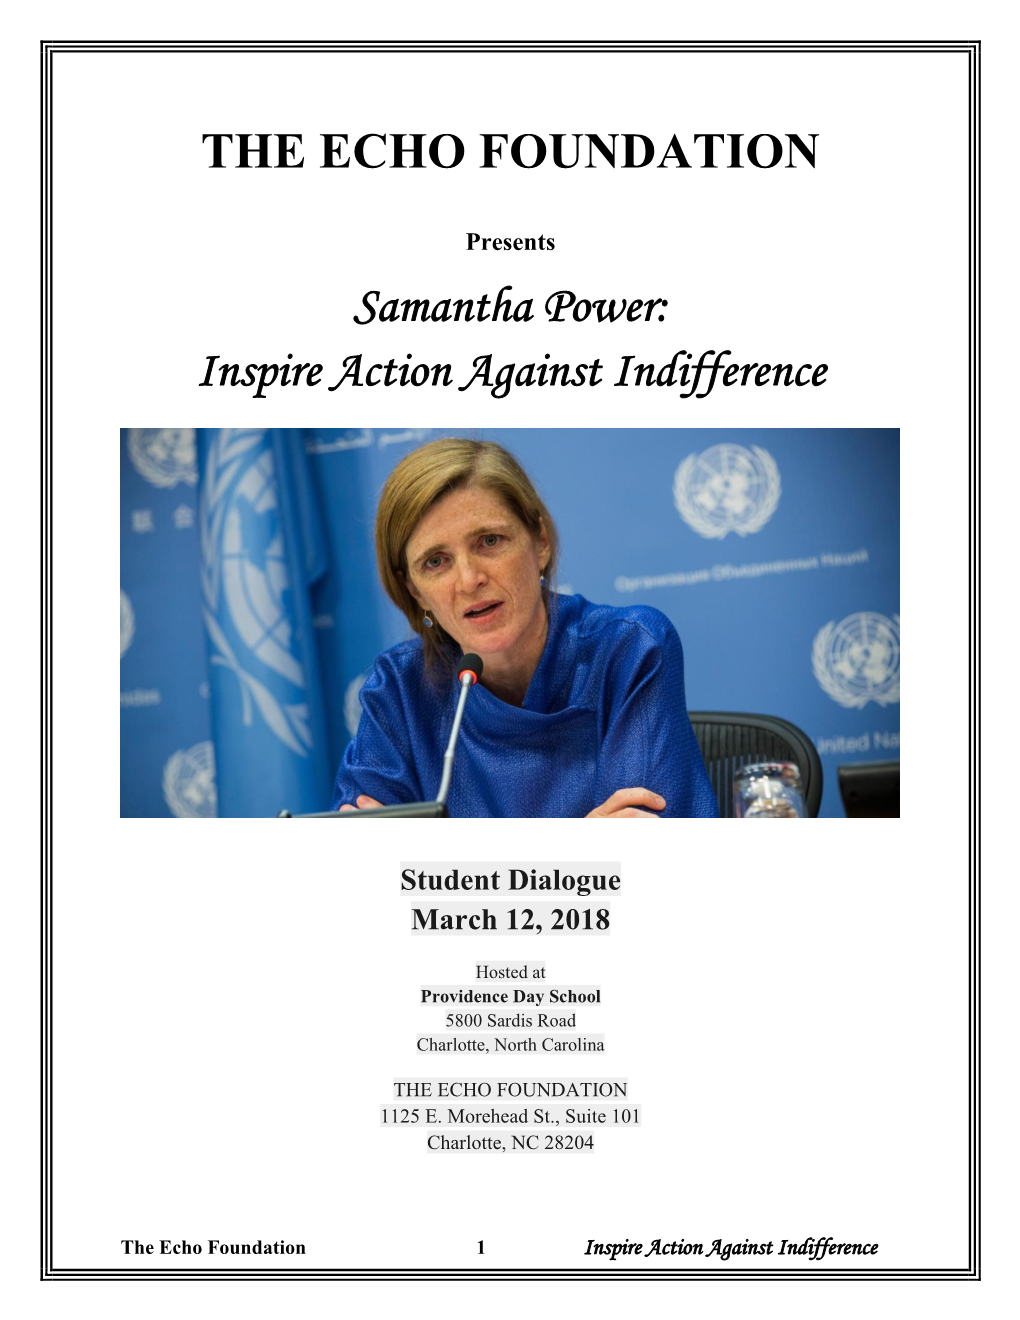 THE ECHO FOUNDATION Samantha Power: Inspire Action Against Indifference